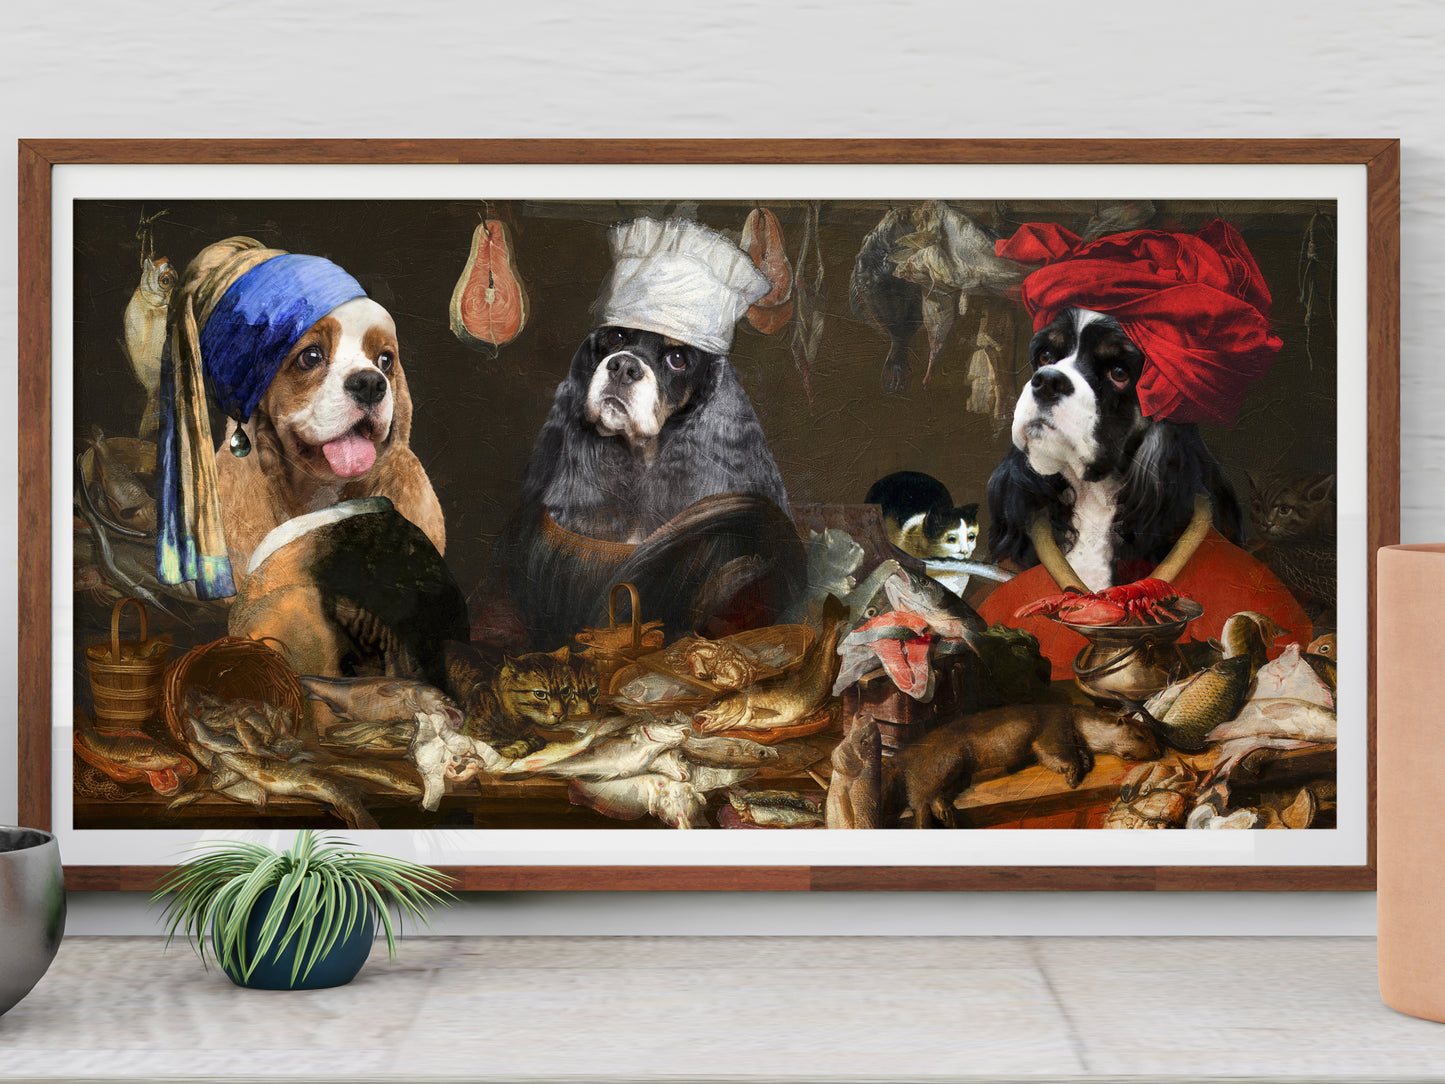 American Cocker Spaniels, Kitchen Scene, Mona Lisa Chef, Maid with pearl earring, Fish Gourmet with a red turban